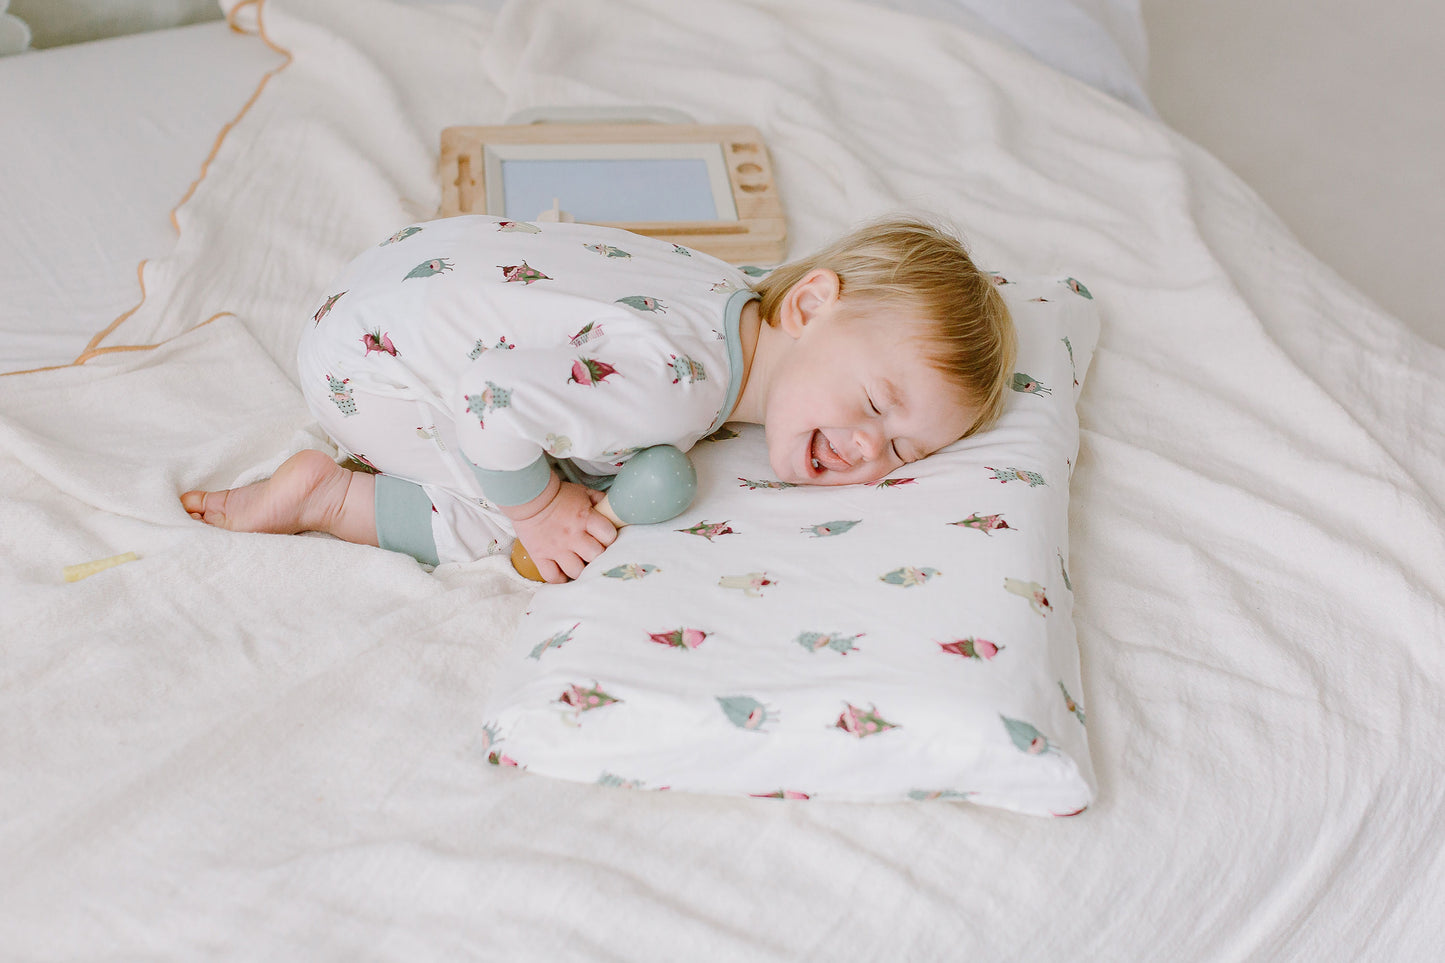 Toddler Pillow With Pillowcase (Bamboo Silk) - Pixie Dust